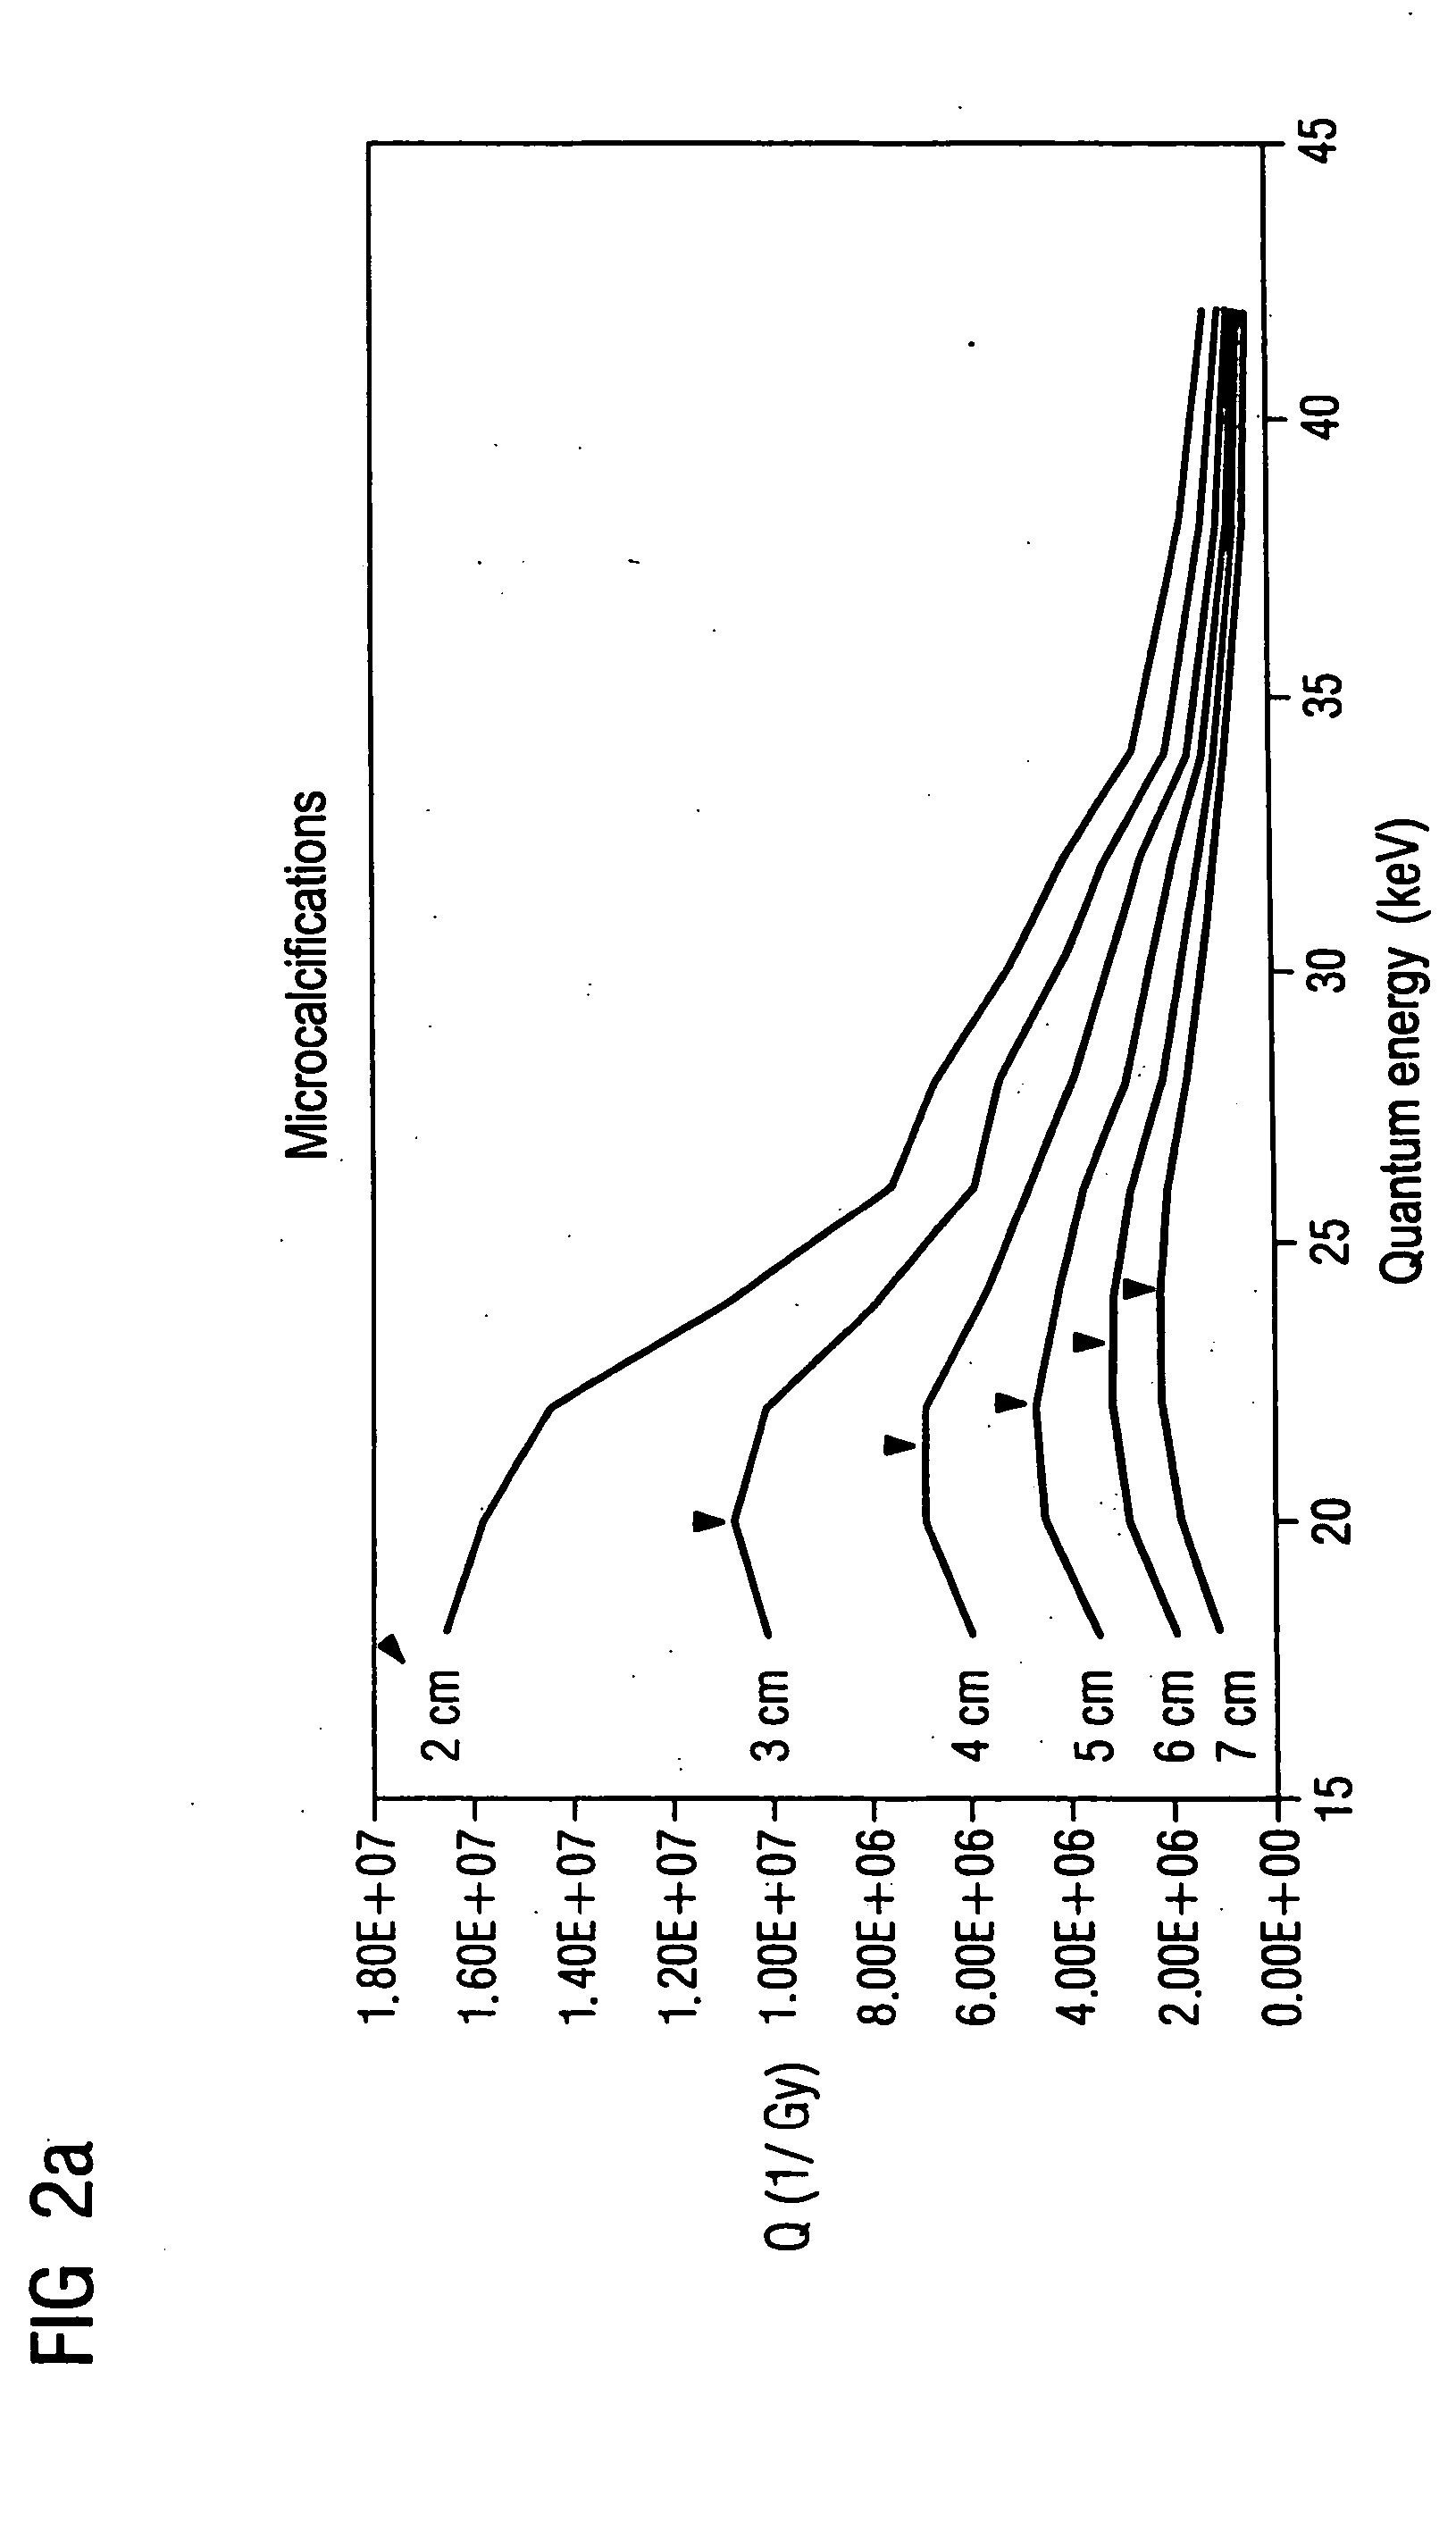 X-ray mammography apparatus with radiation dose-reducing filter